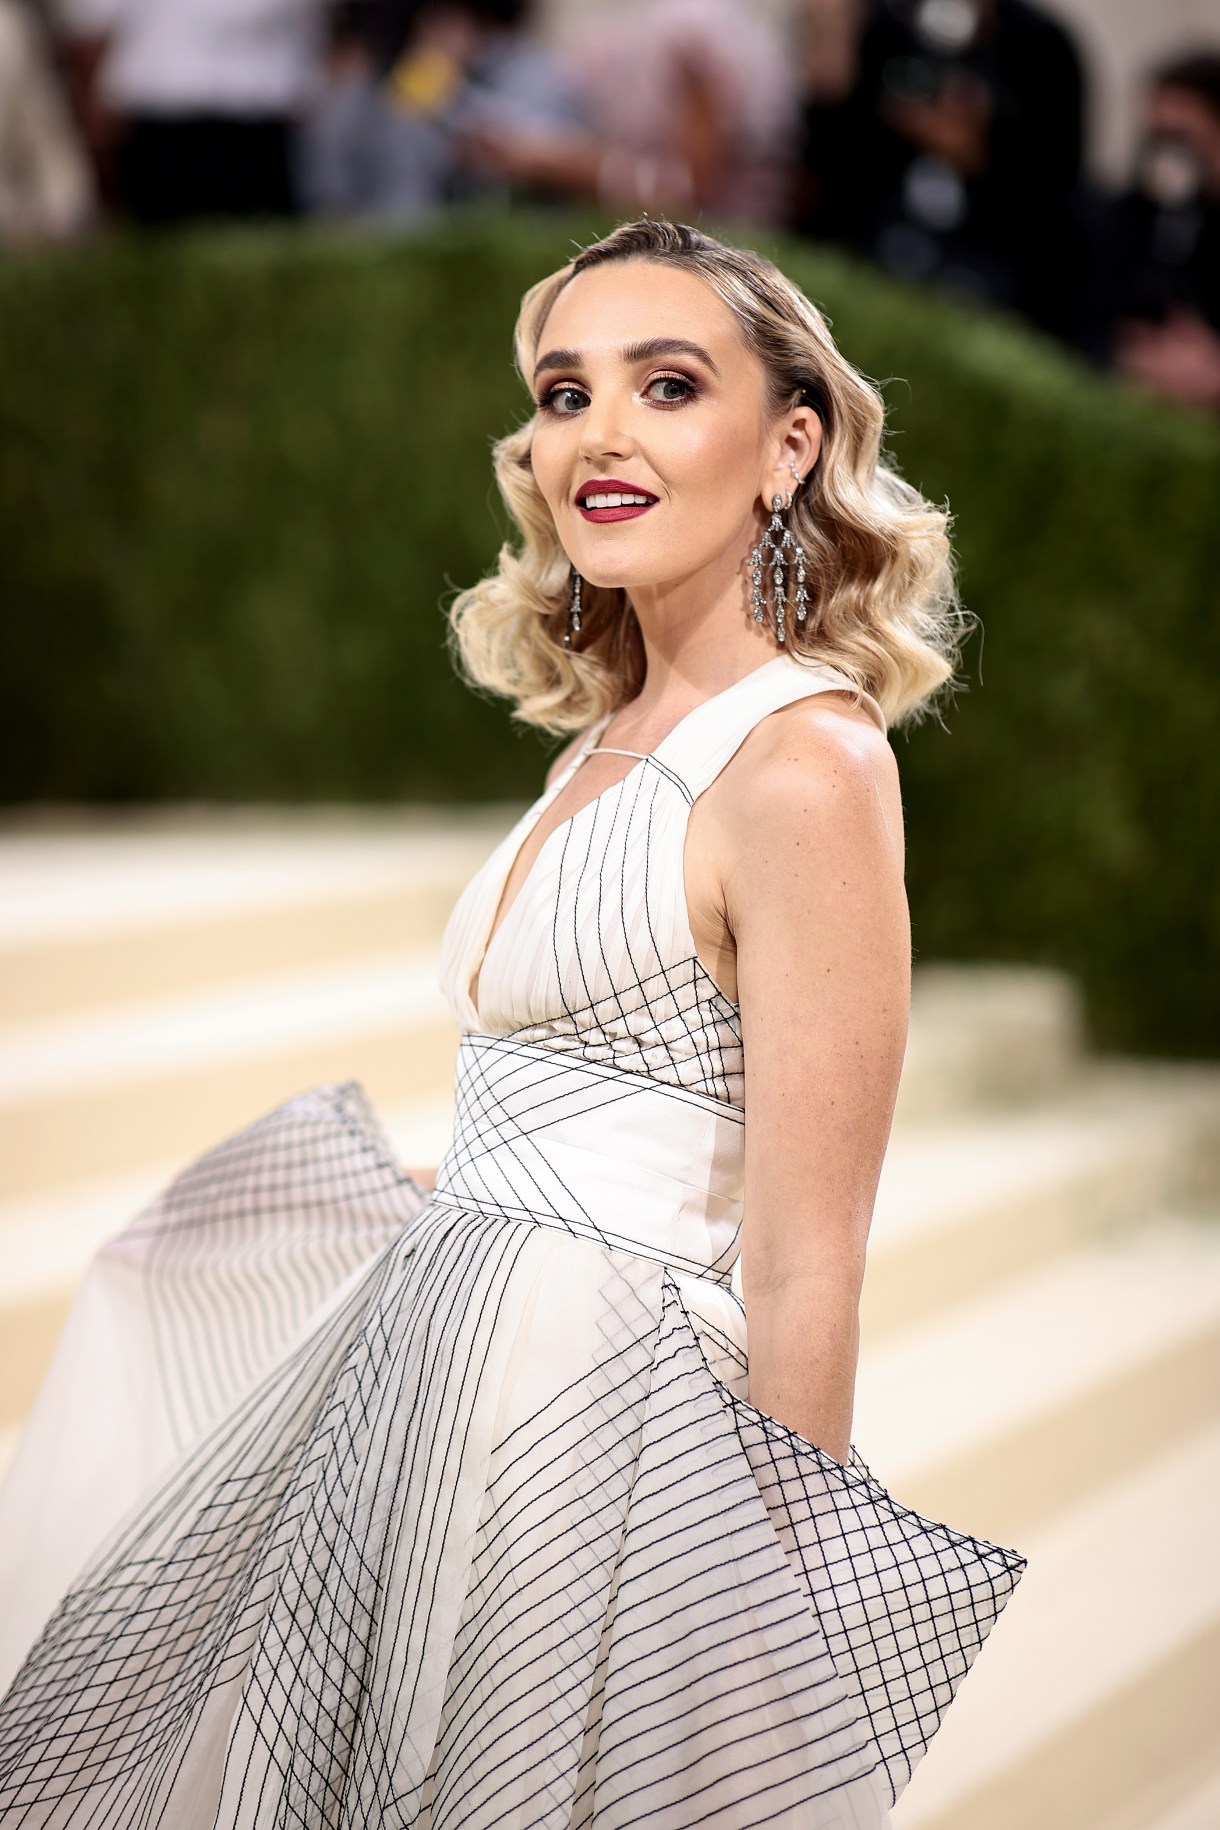 NEW YORK, NEW YORK - SEPTEMBER 13: Chloe Fineman attends The 2021 Met Gala Celebrating In America: A Lexicon Of Fashion at Metropolitan Museum of Art on September 13, 2021 in New York City. 